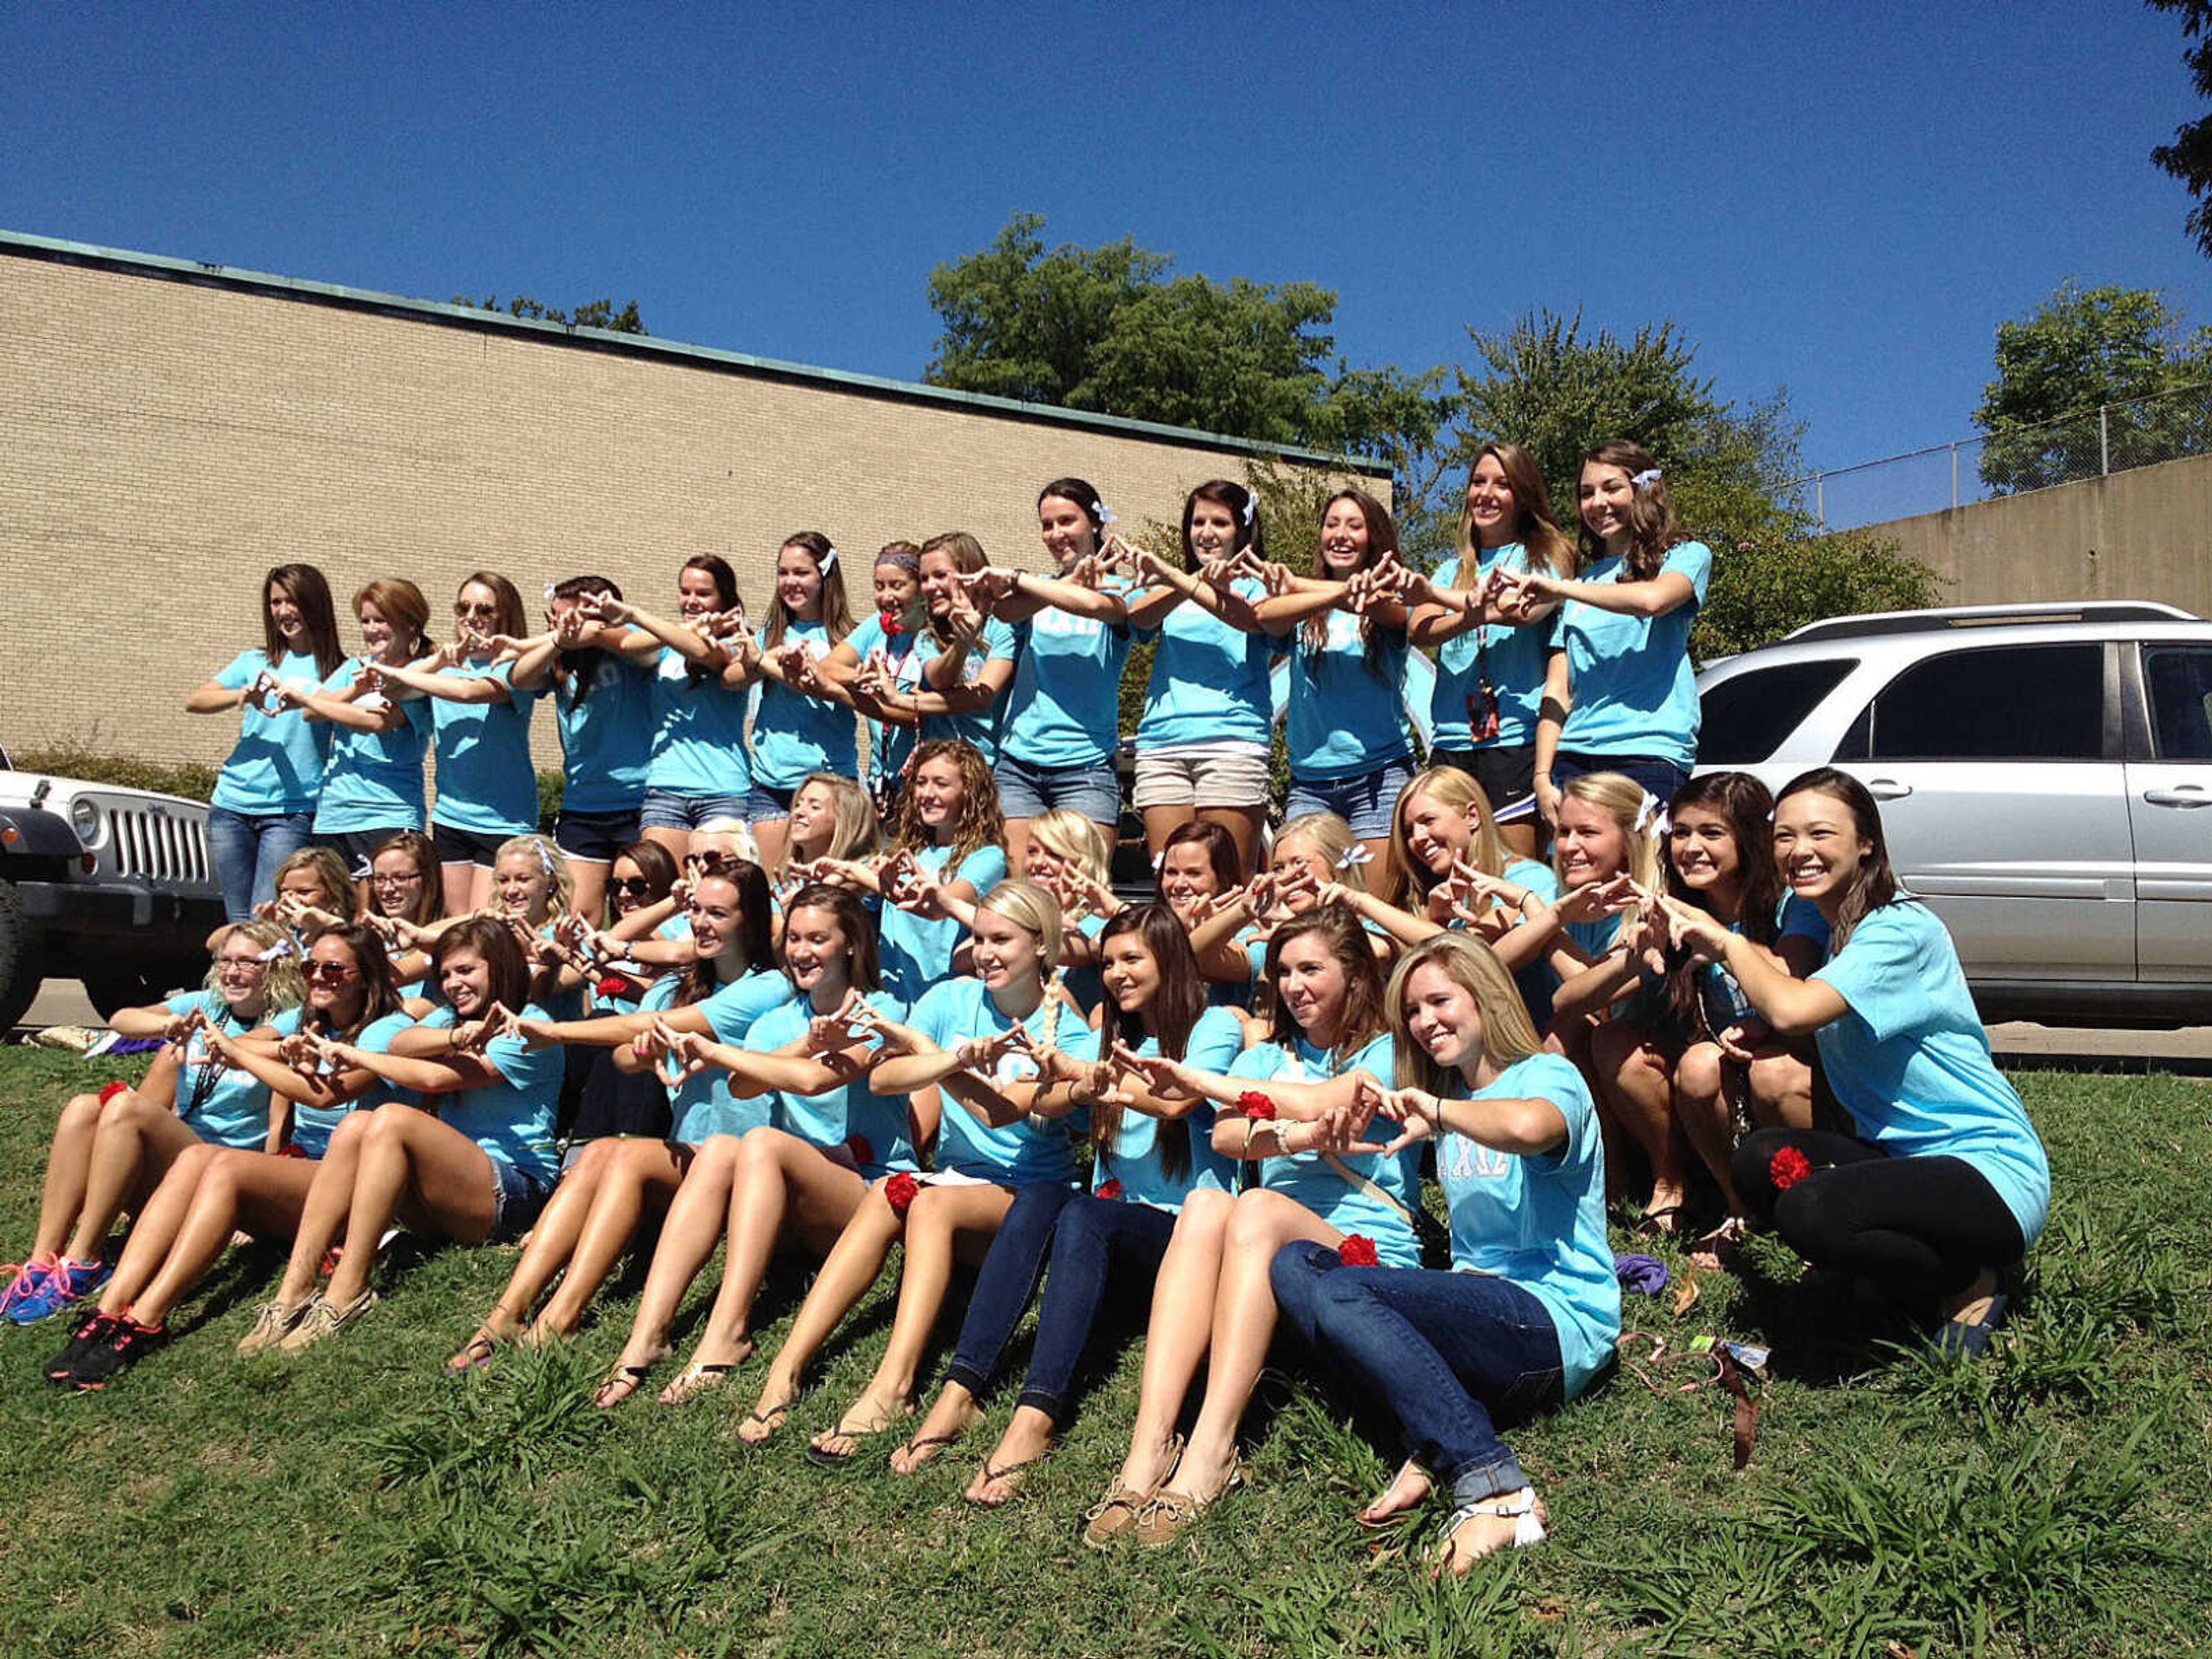 Women from Alpha Chi Omega pose for a group picture at Bid Day on Sunday. Most of the sororities and fraternities had group pictures taken. Photo by Lauren Fox